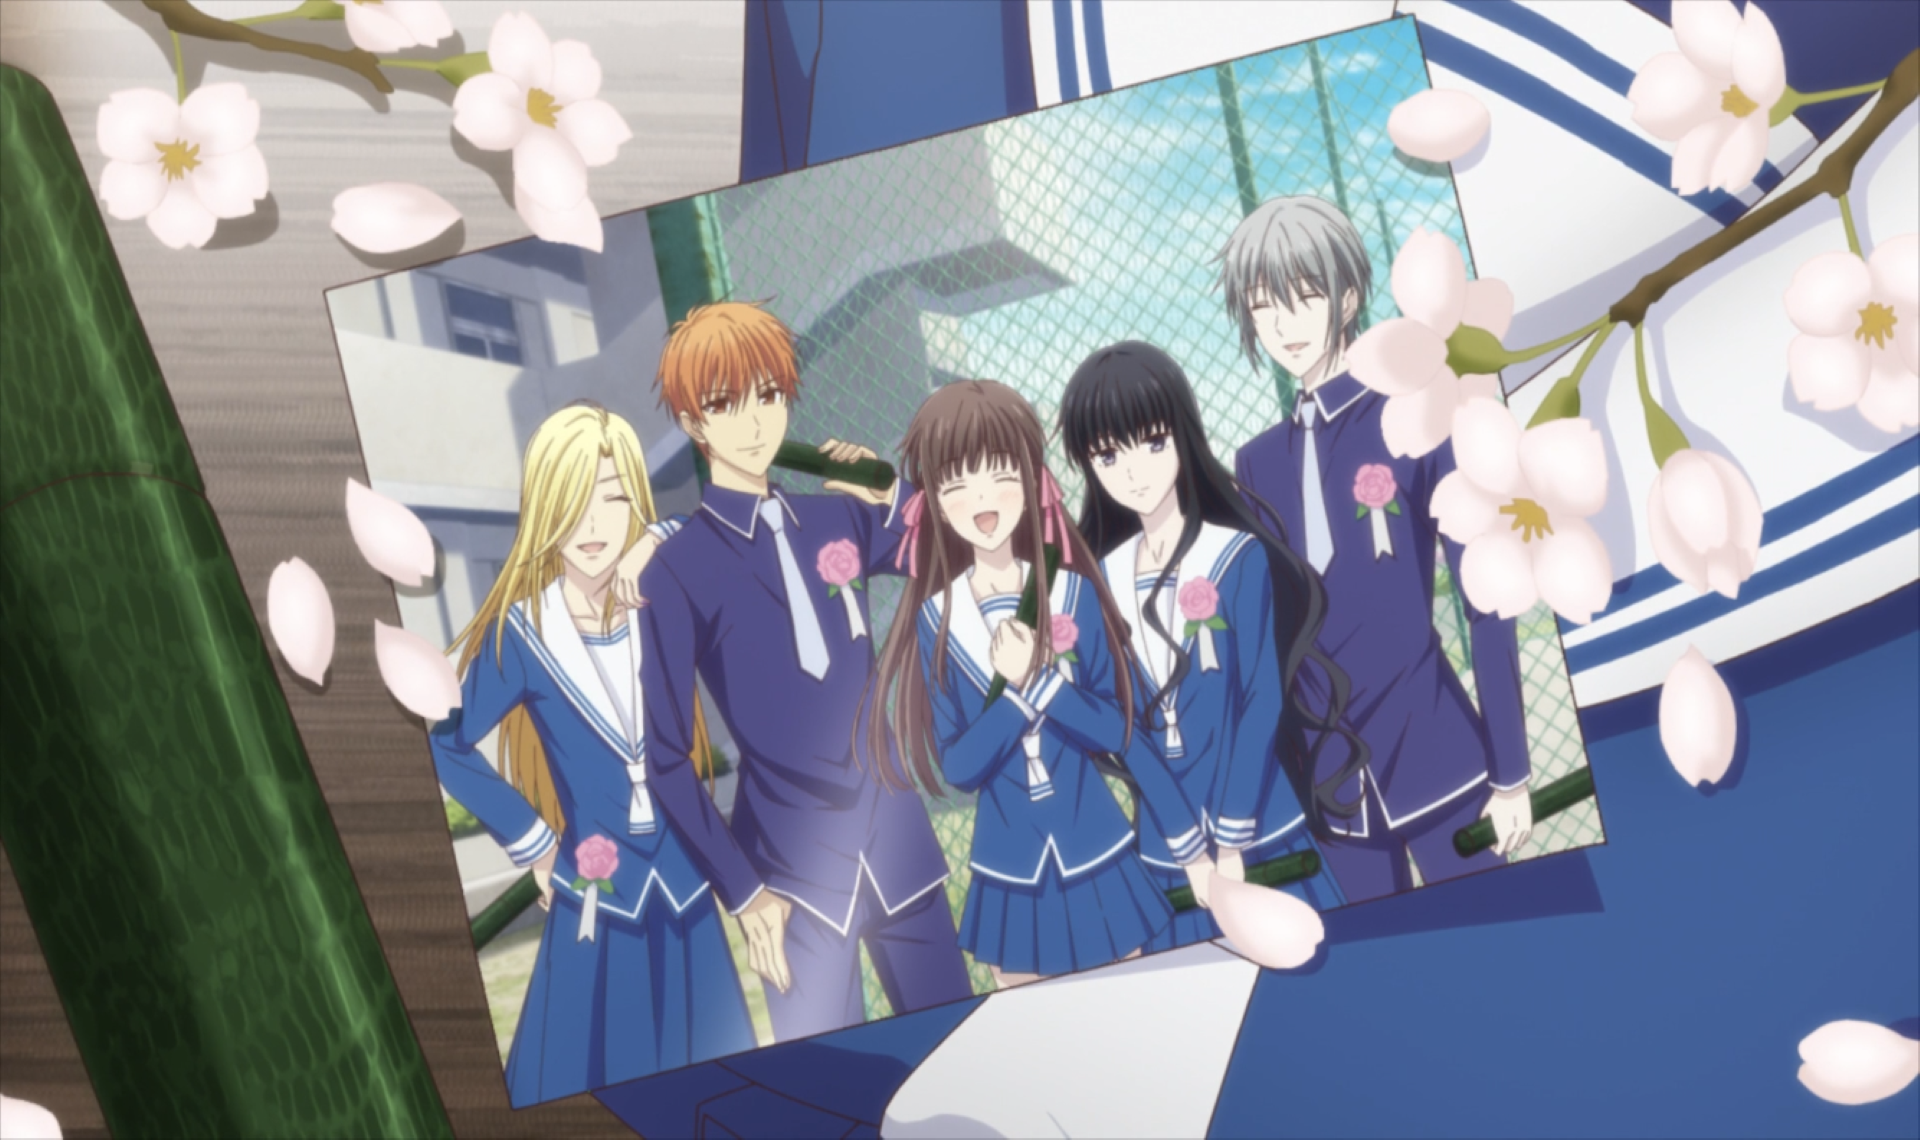 Fruits Basket Manga Gets New Spin-off Anime, Stage Play in 2022